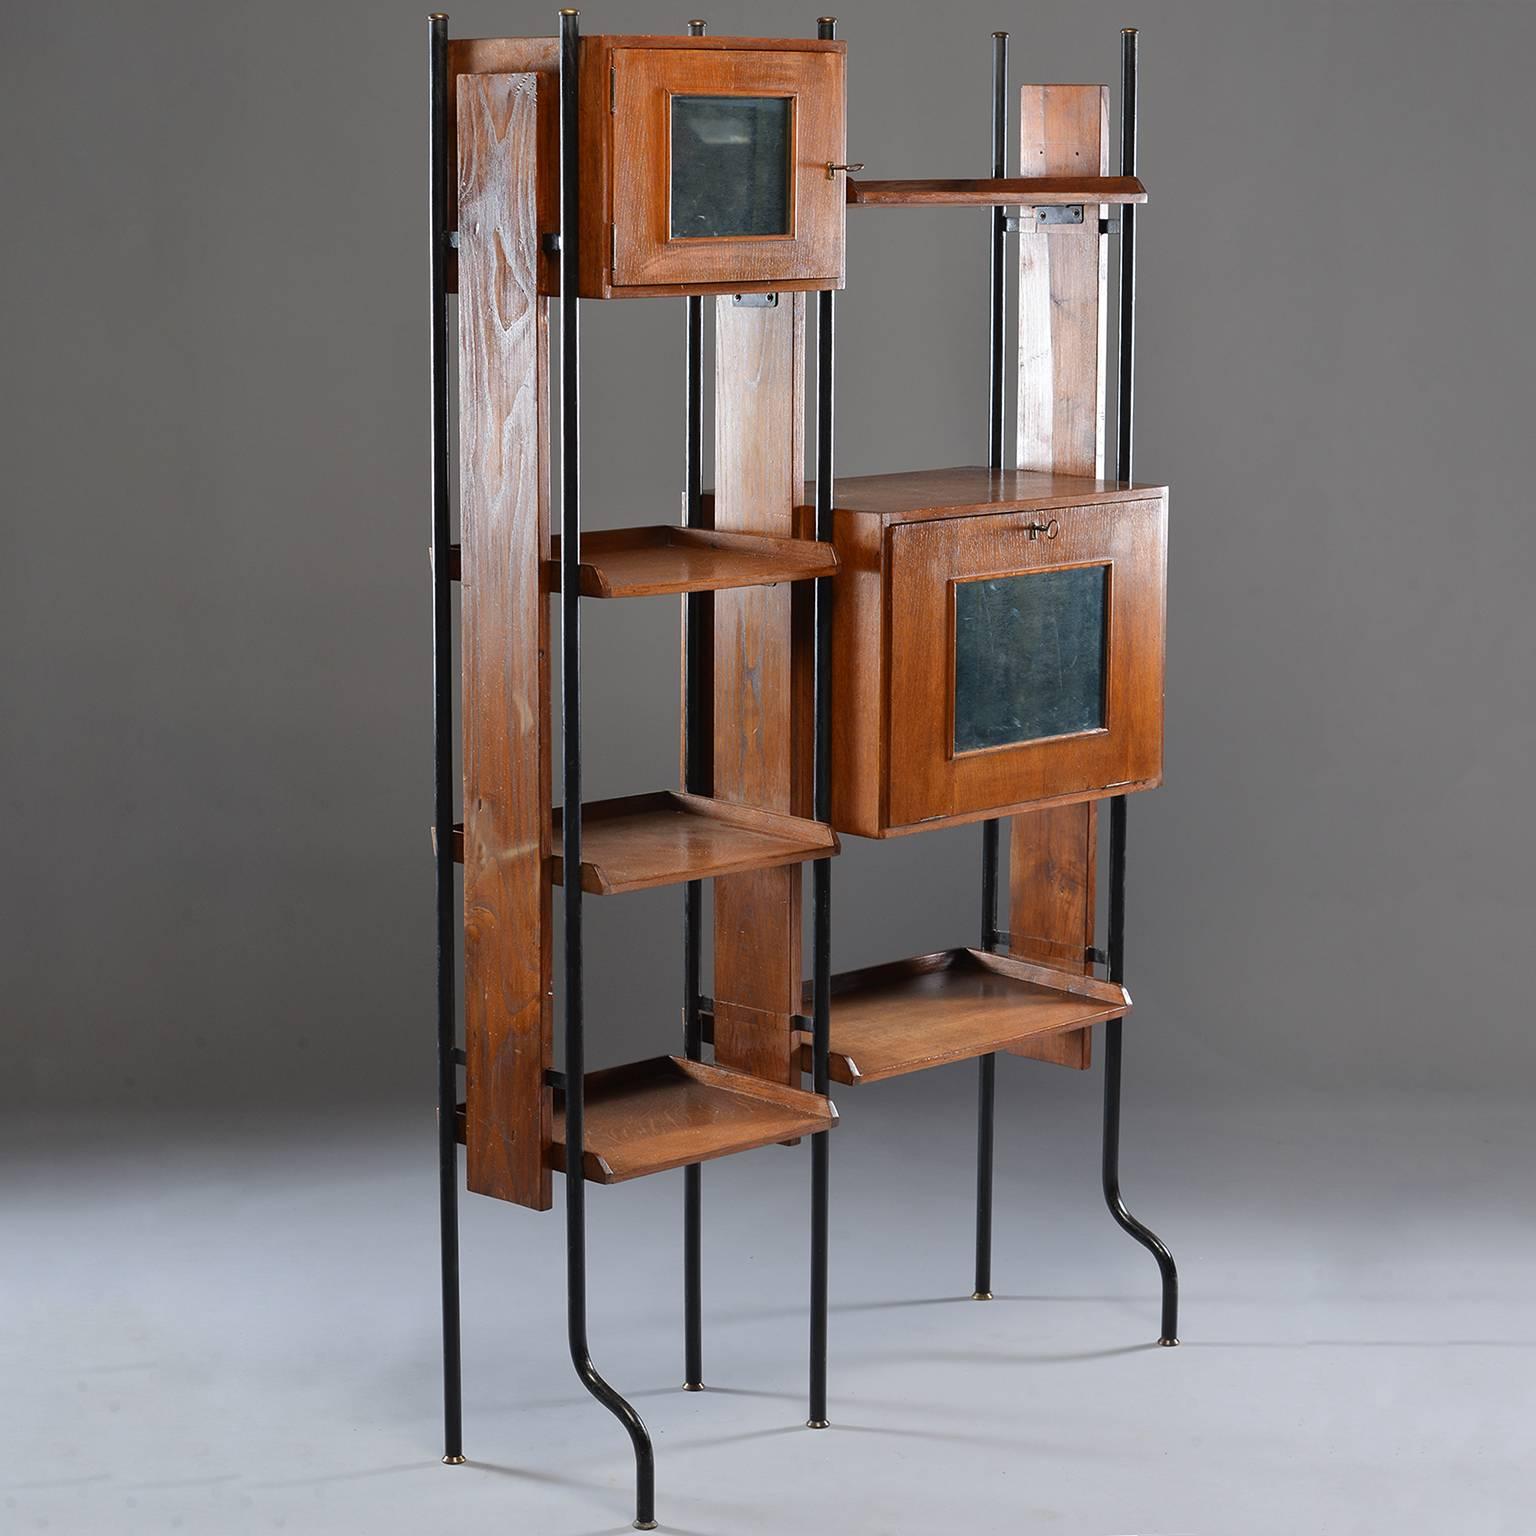 Small Italian etagere in manner of Vittorio Dassi features ebonized metal frame with contrasting wood shelves, circa 1960. Top compartment has working skeleton key lock and mirrored panel on door. Larger compartment is a drop down door that